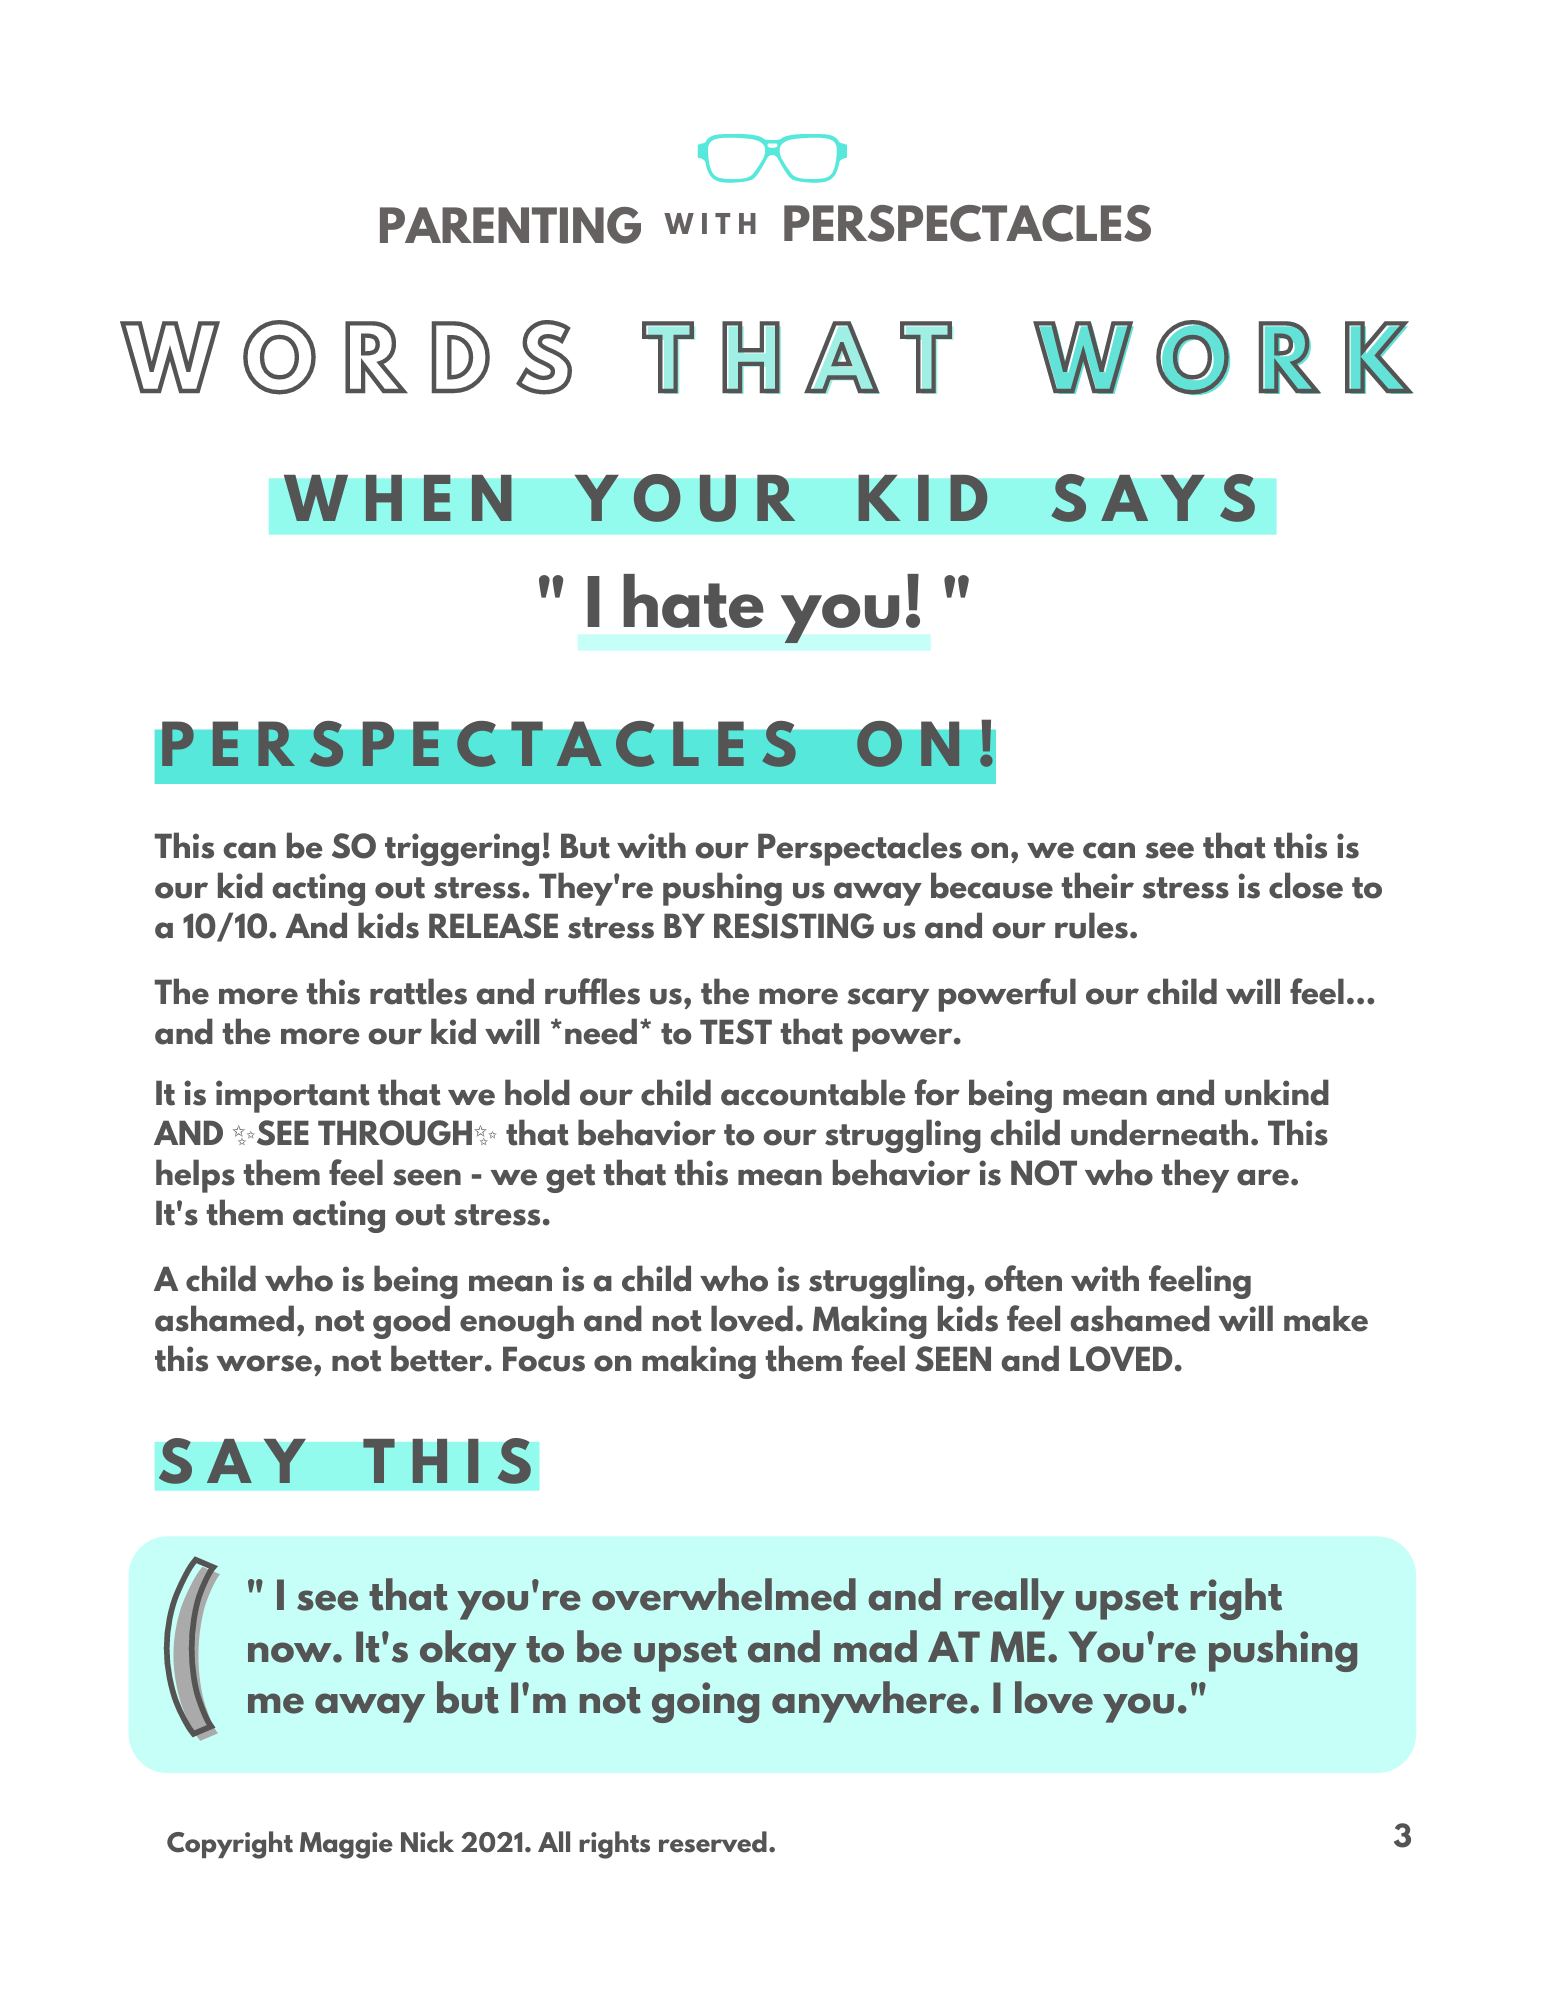 Sample page from Words That Work - What to say when your kid says, "I hate you!"